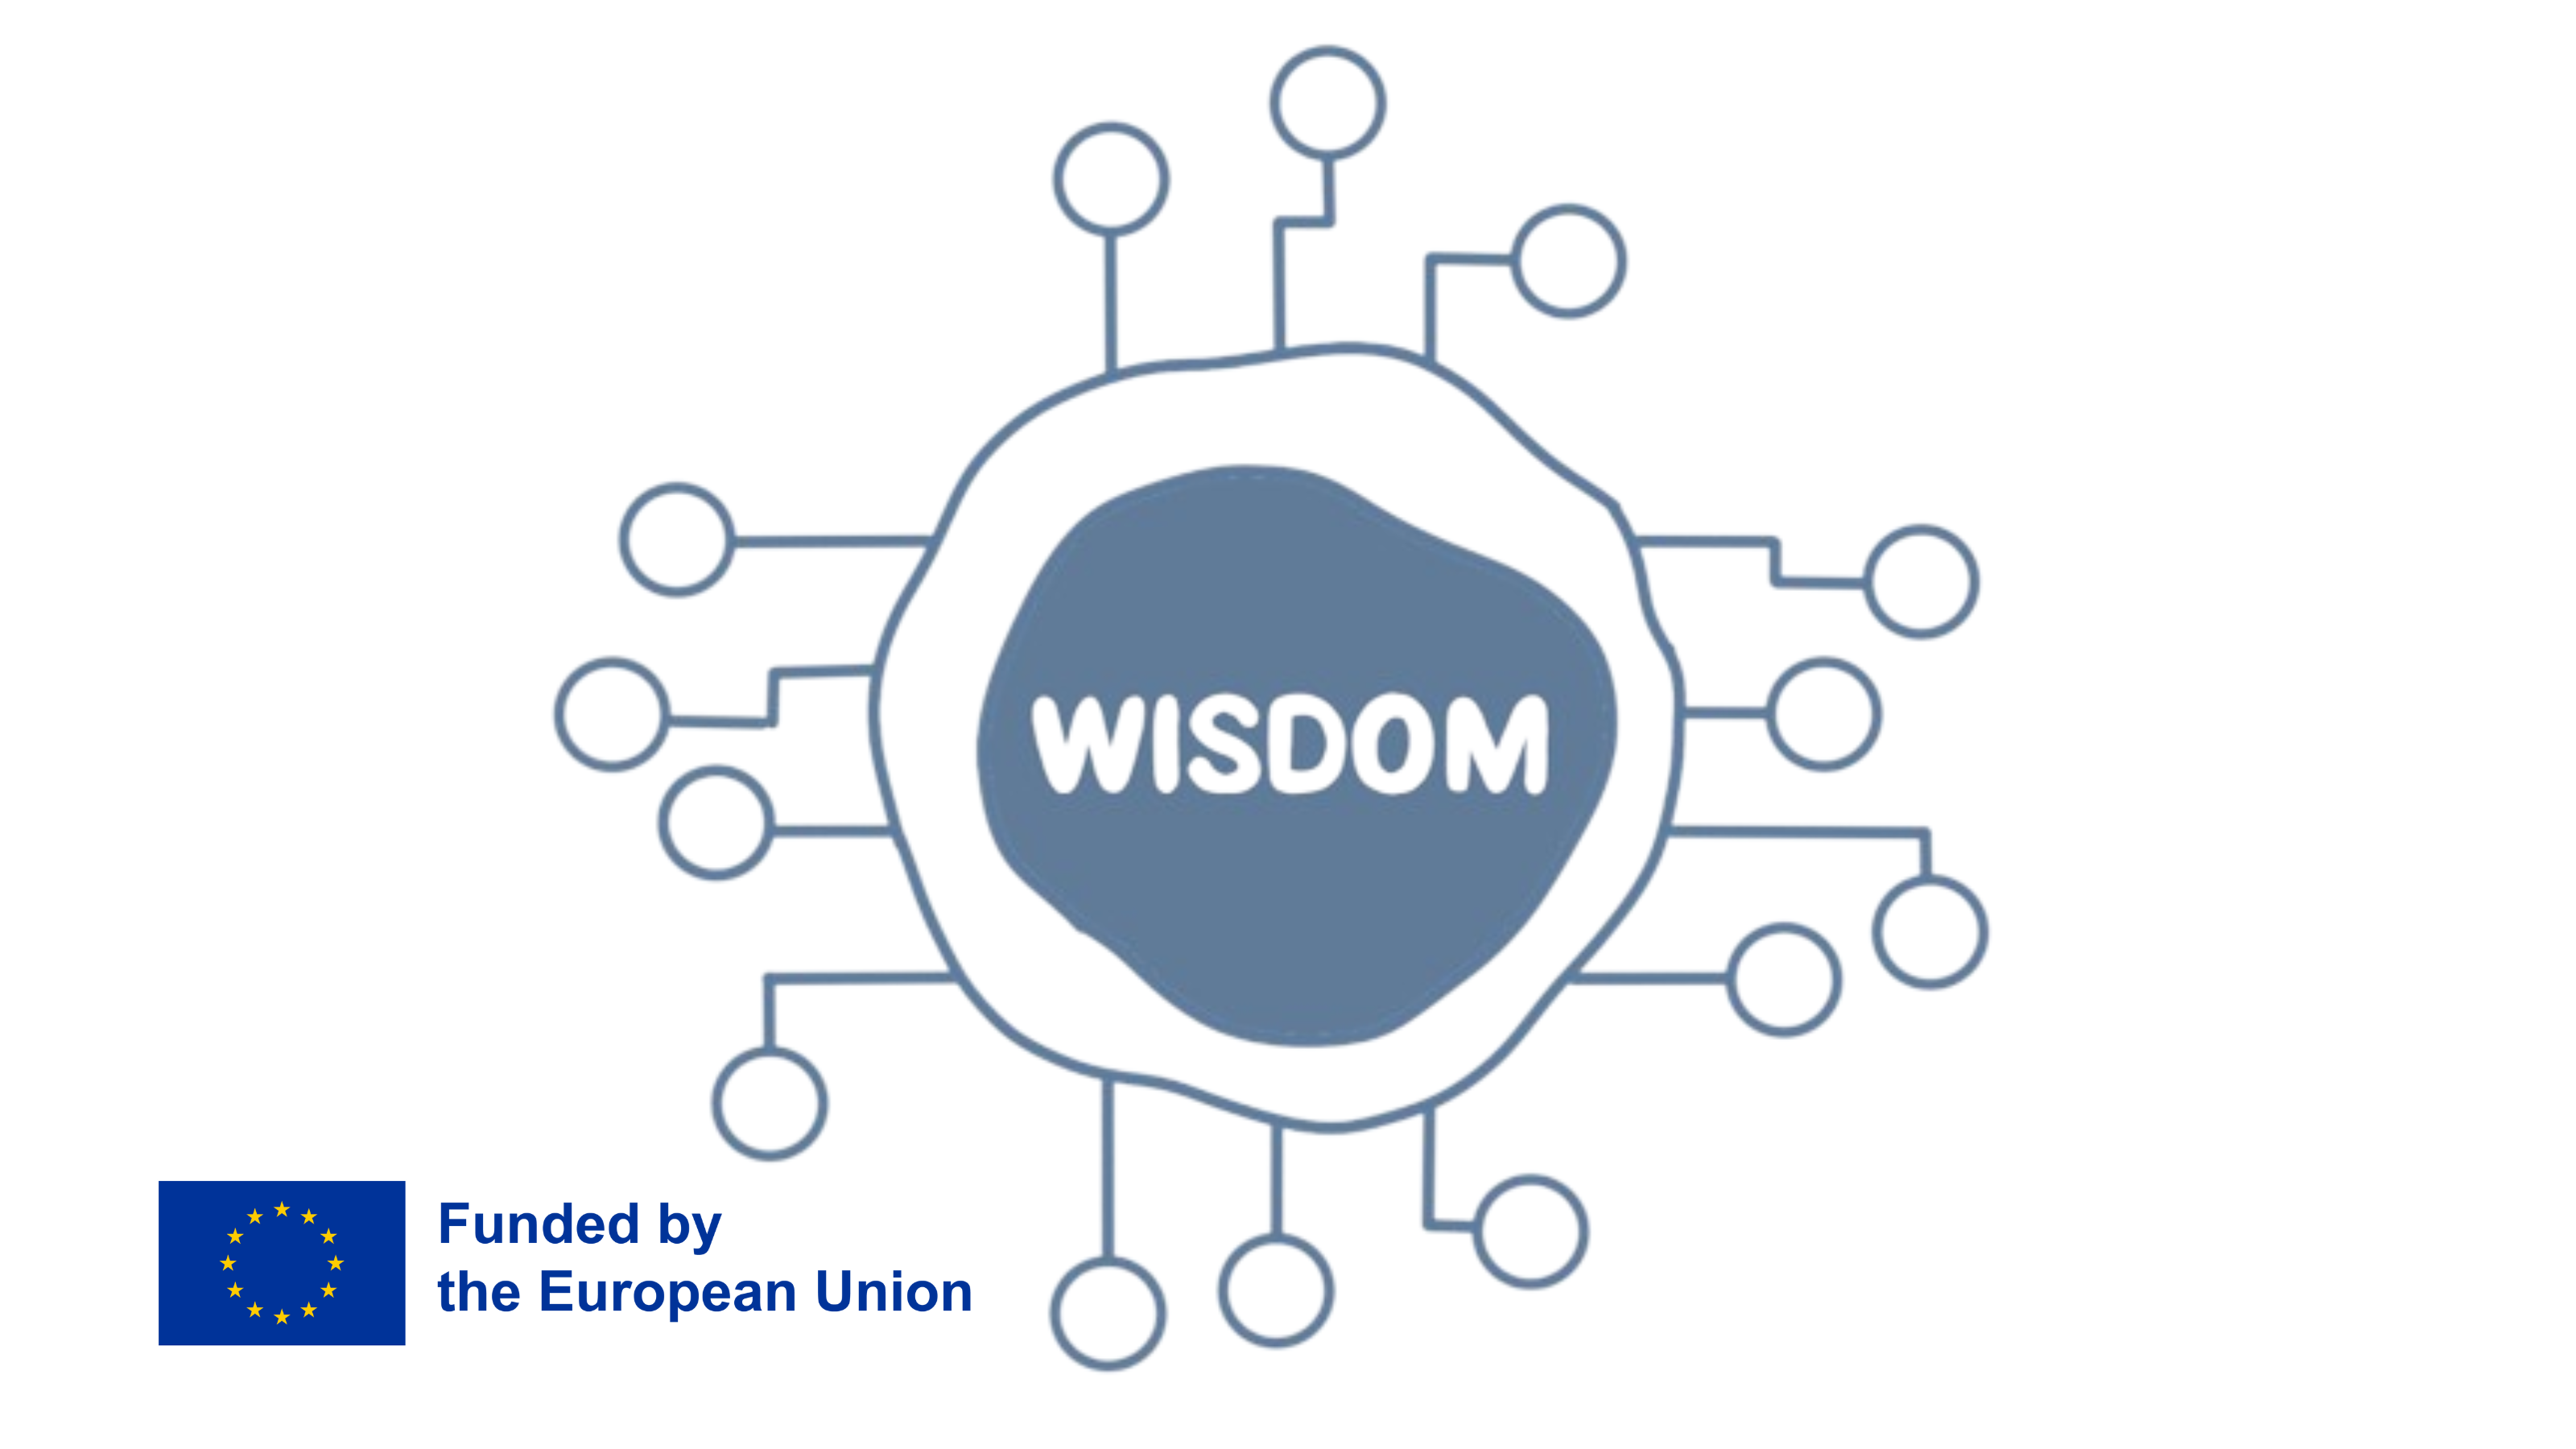 Wisdom project, funded by the European Union